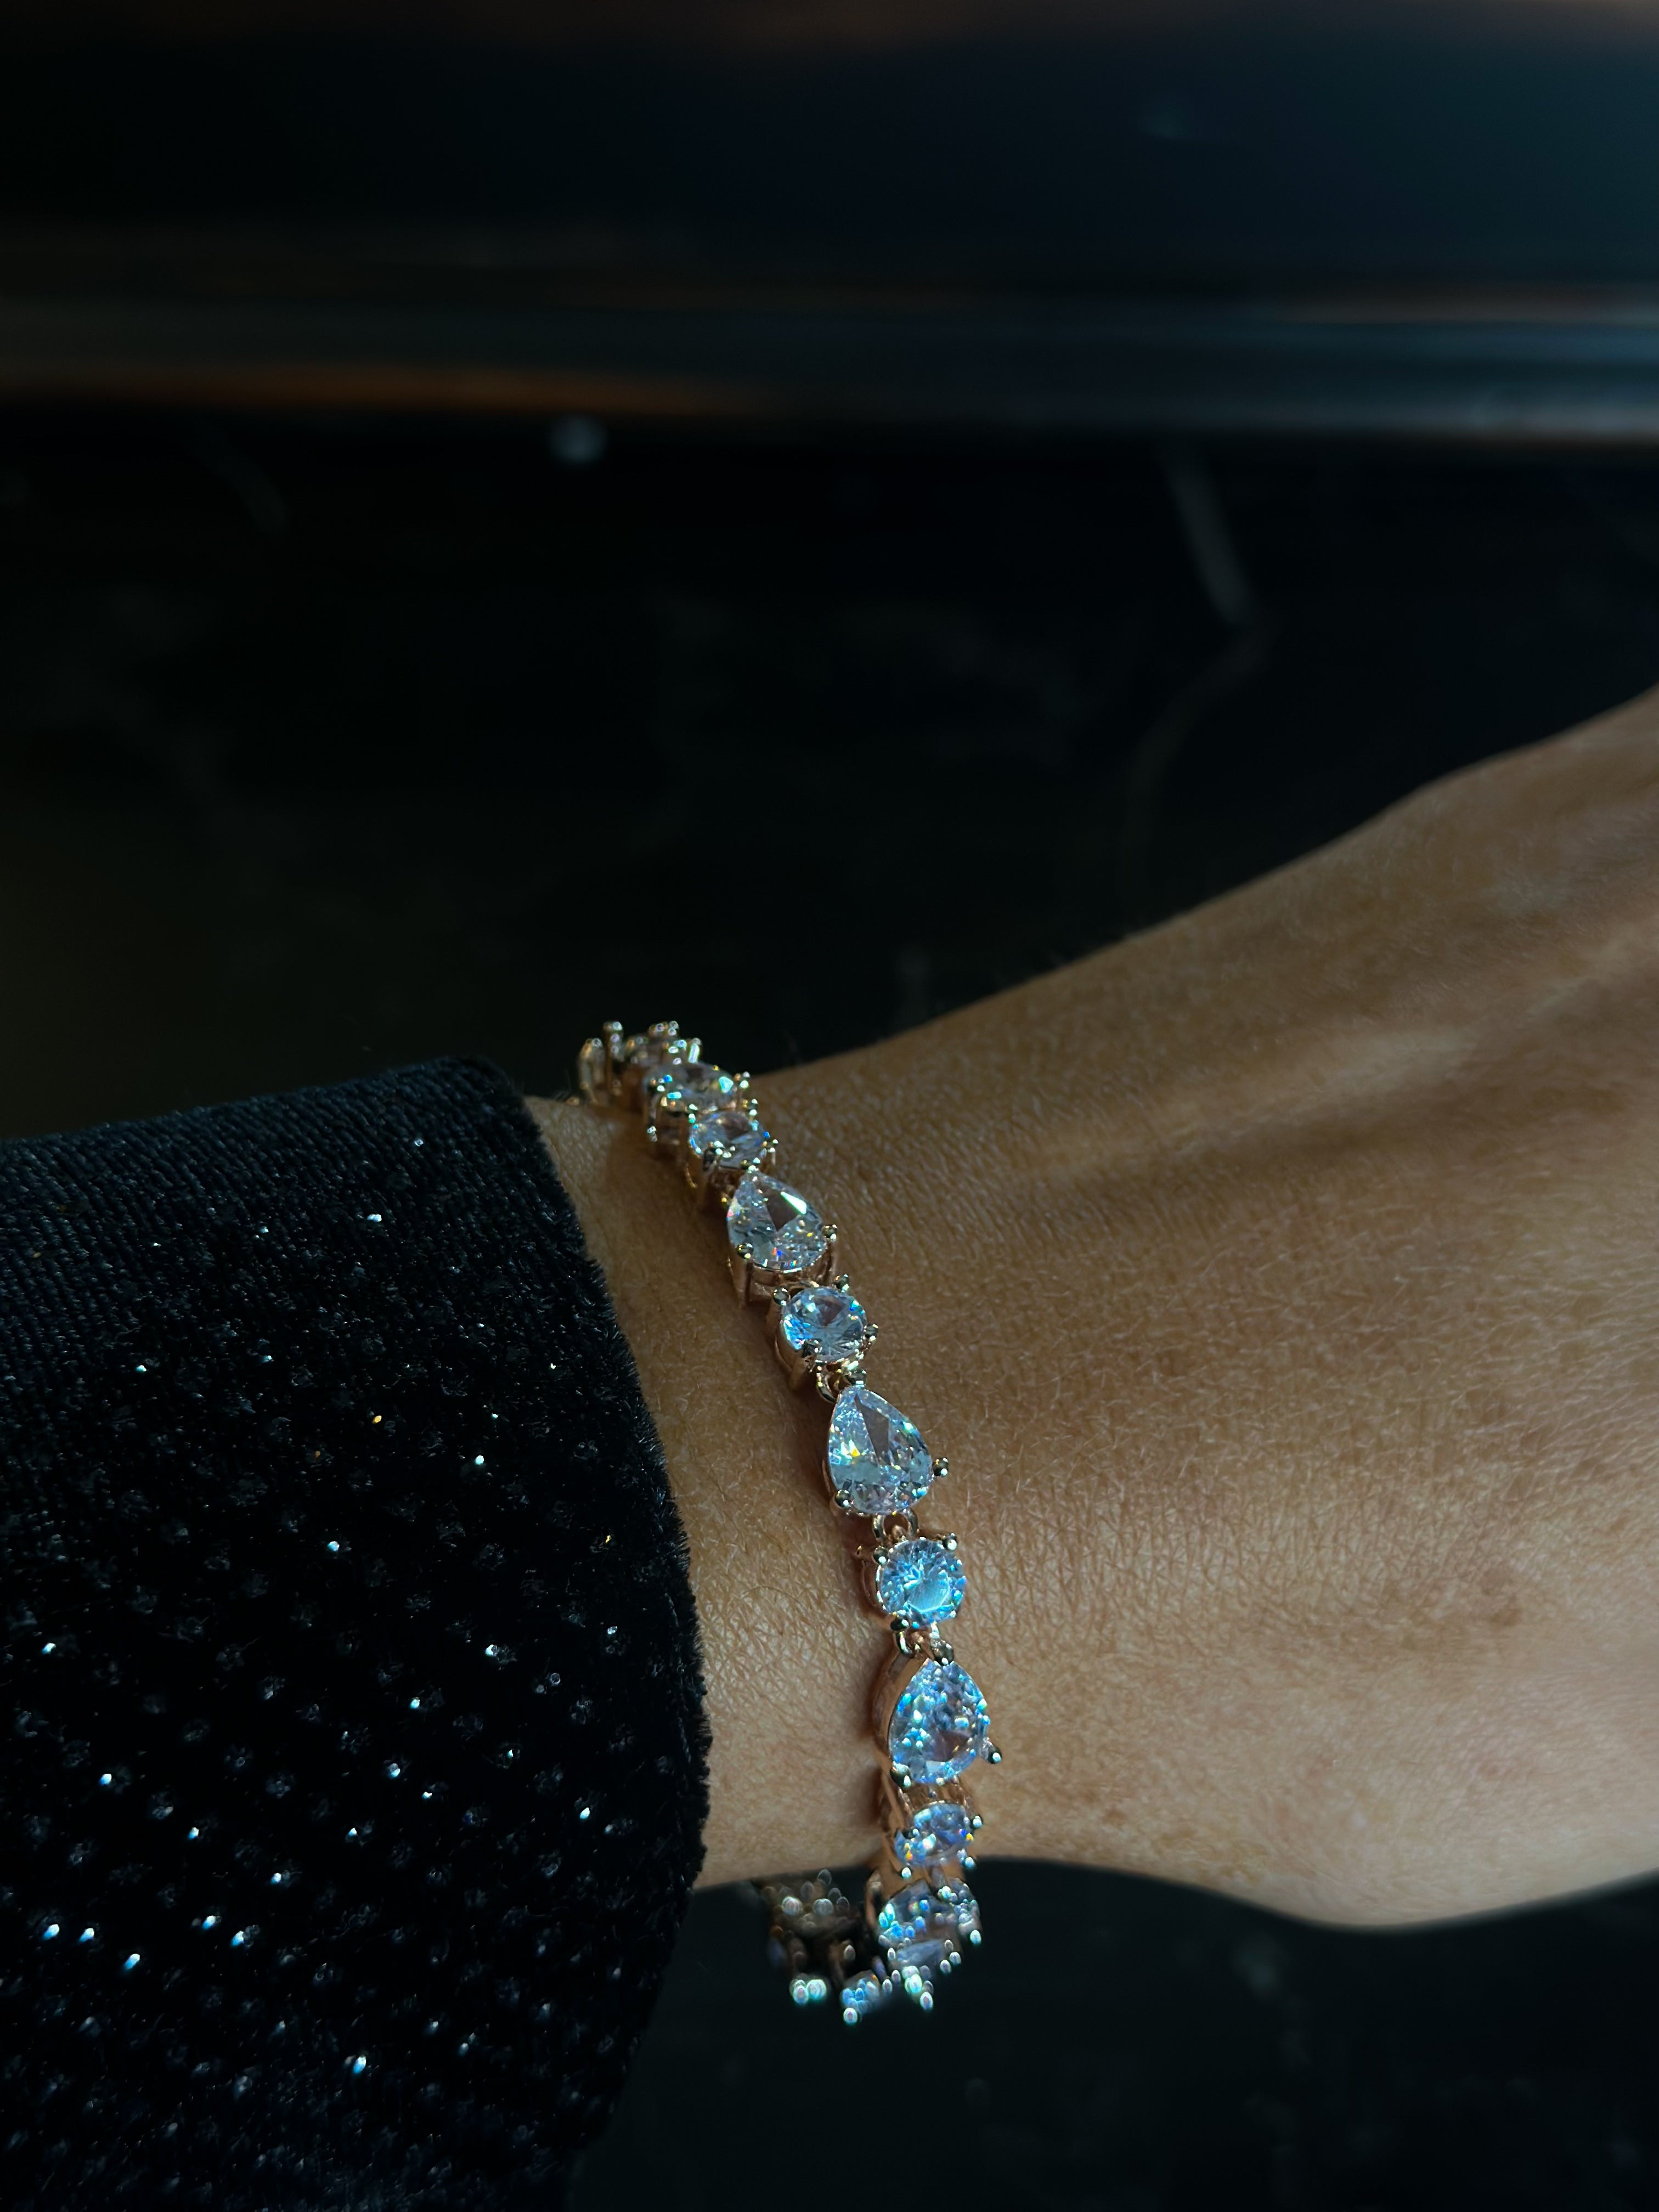 The Silver Plated 'Bree' Bracelet